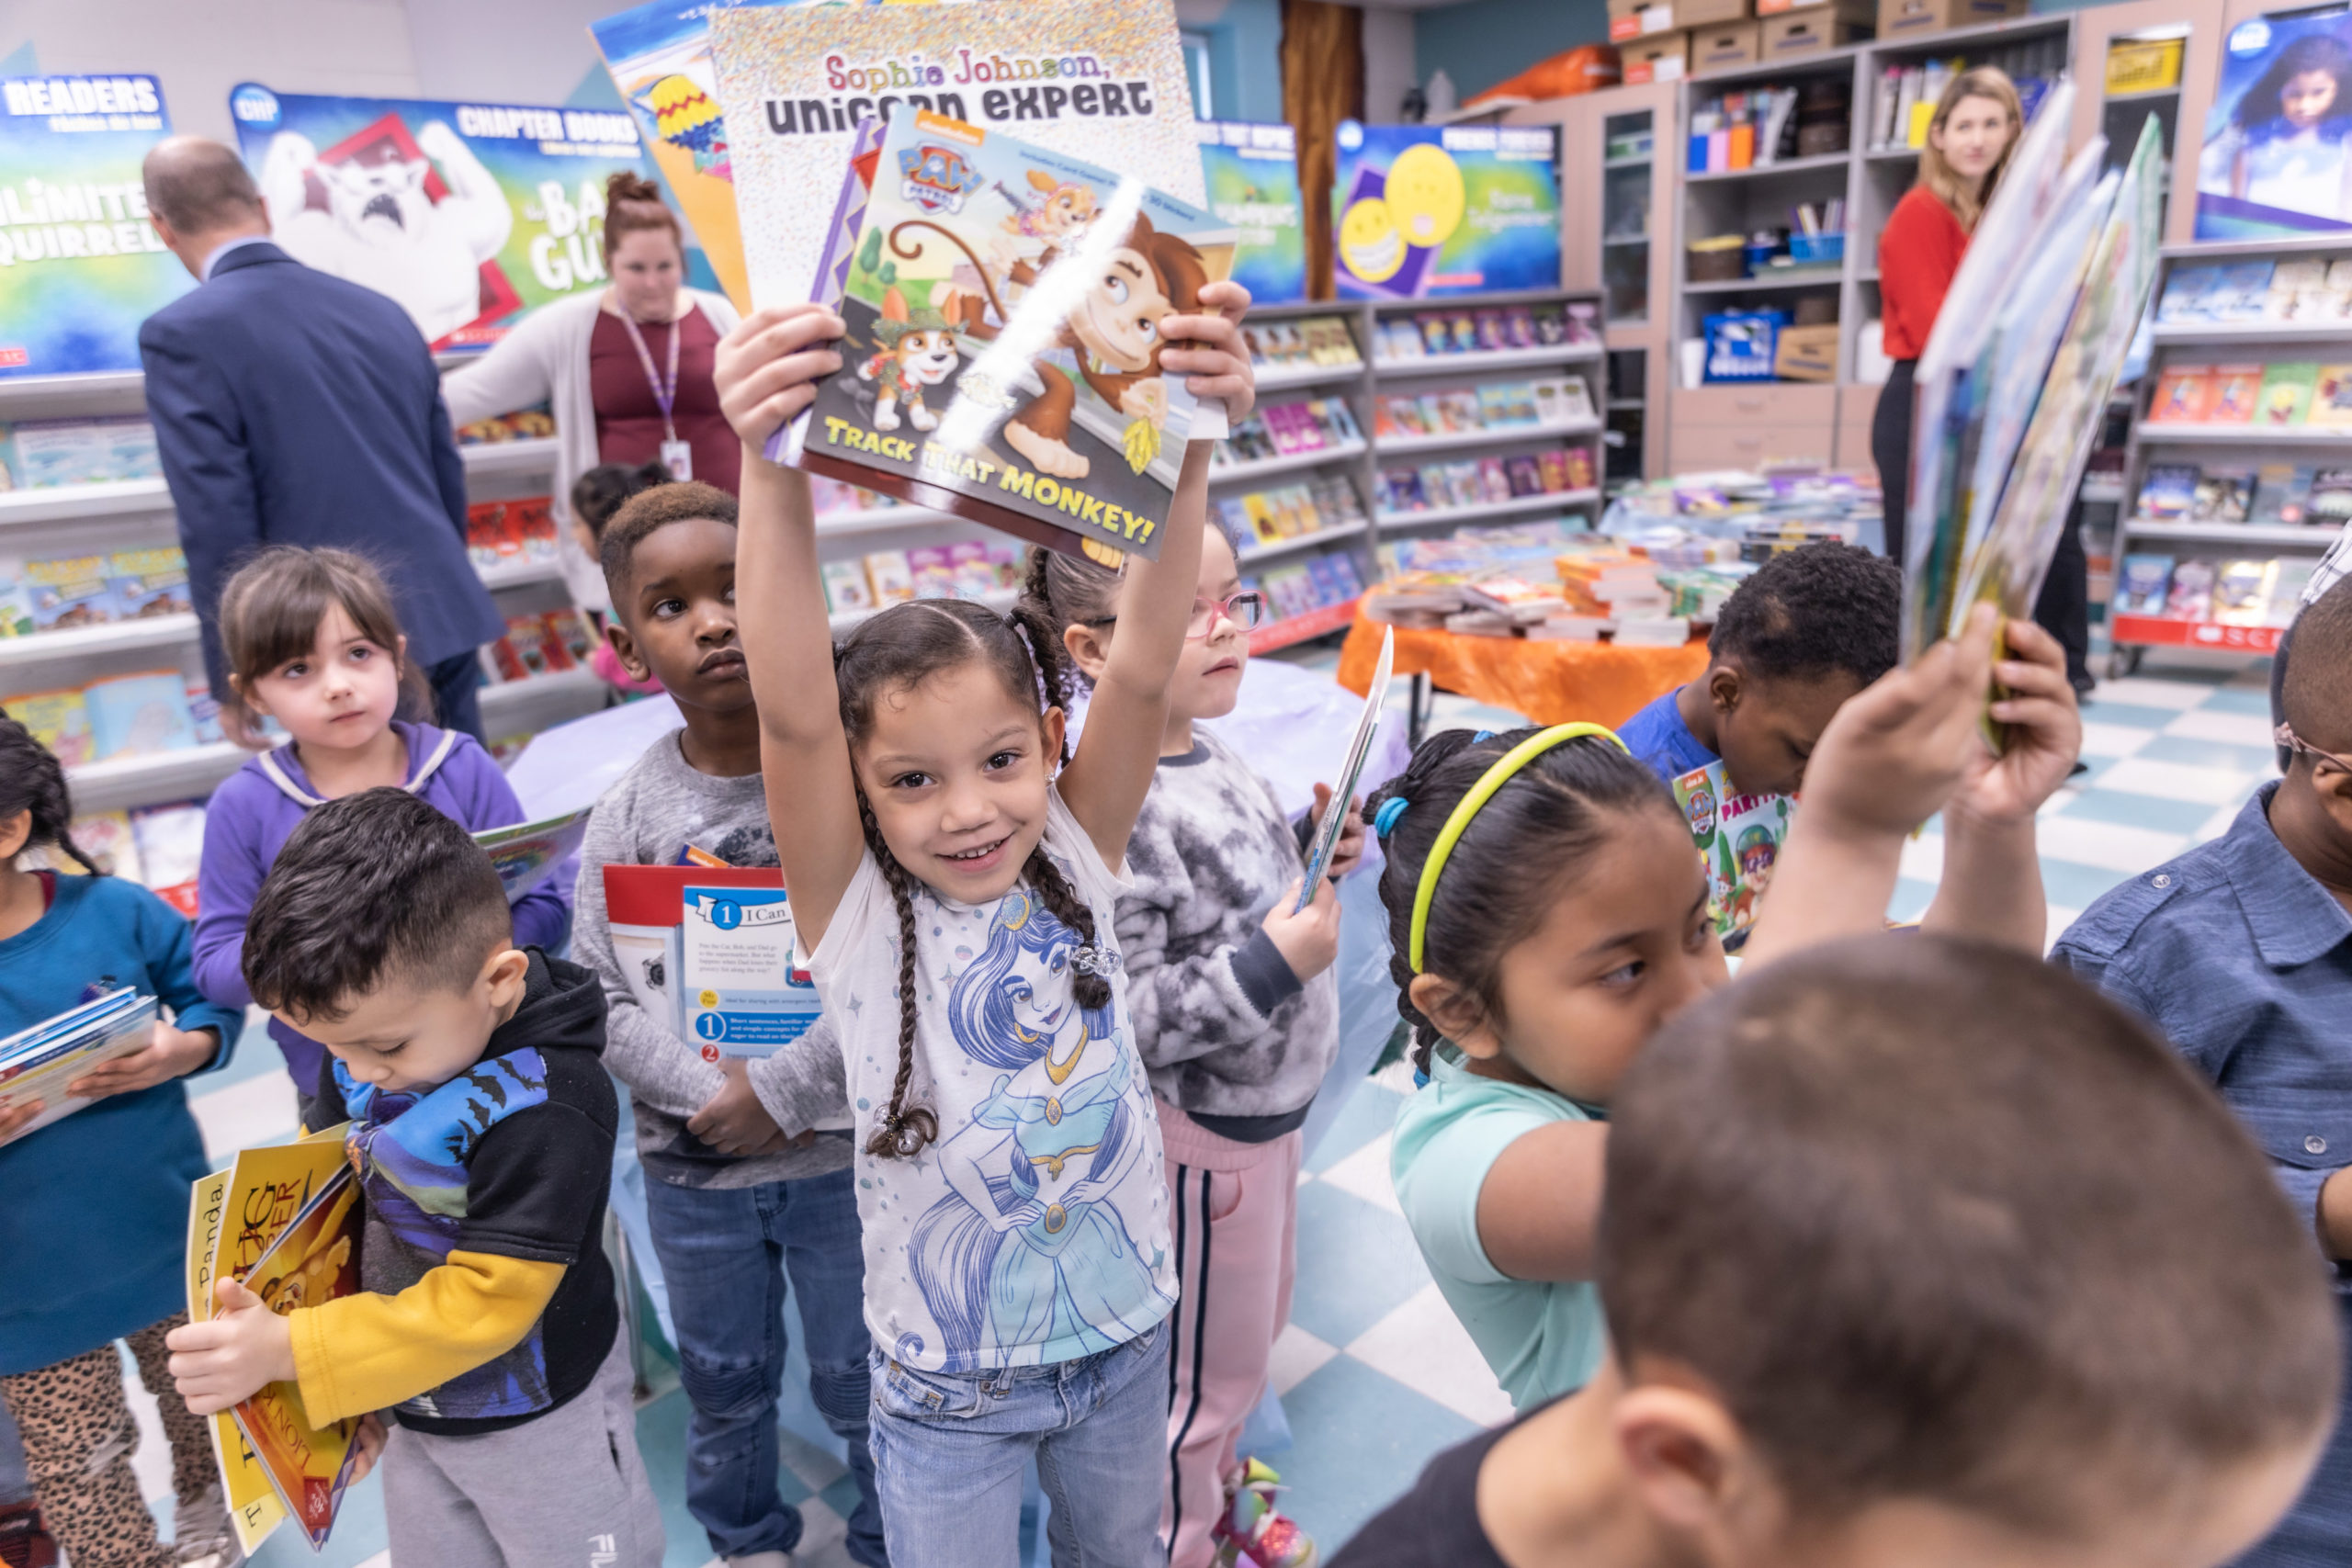 Girl holding up book during a book fair provided by 